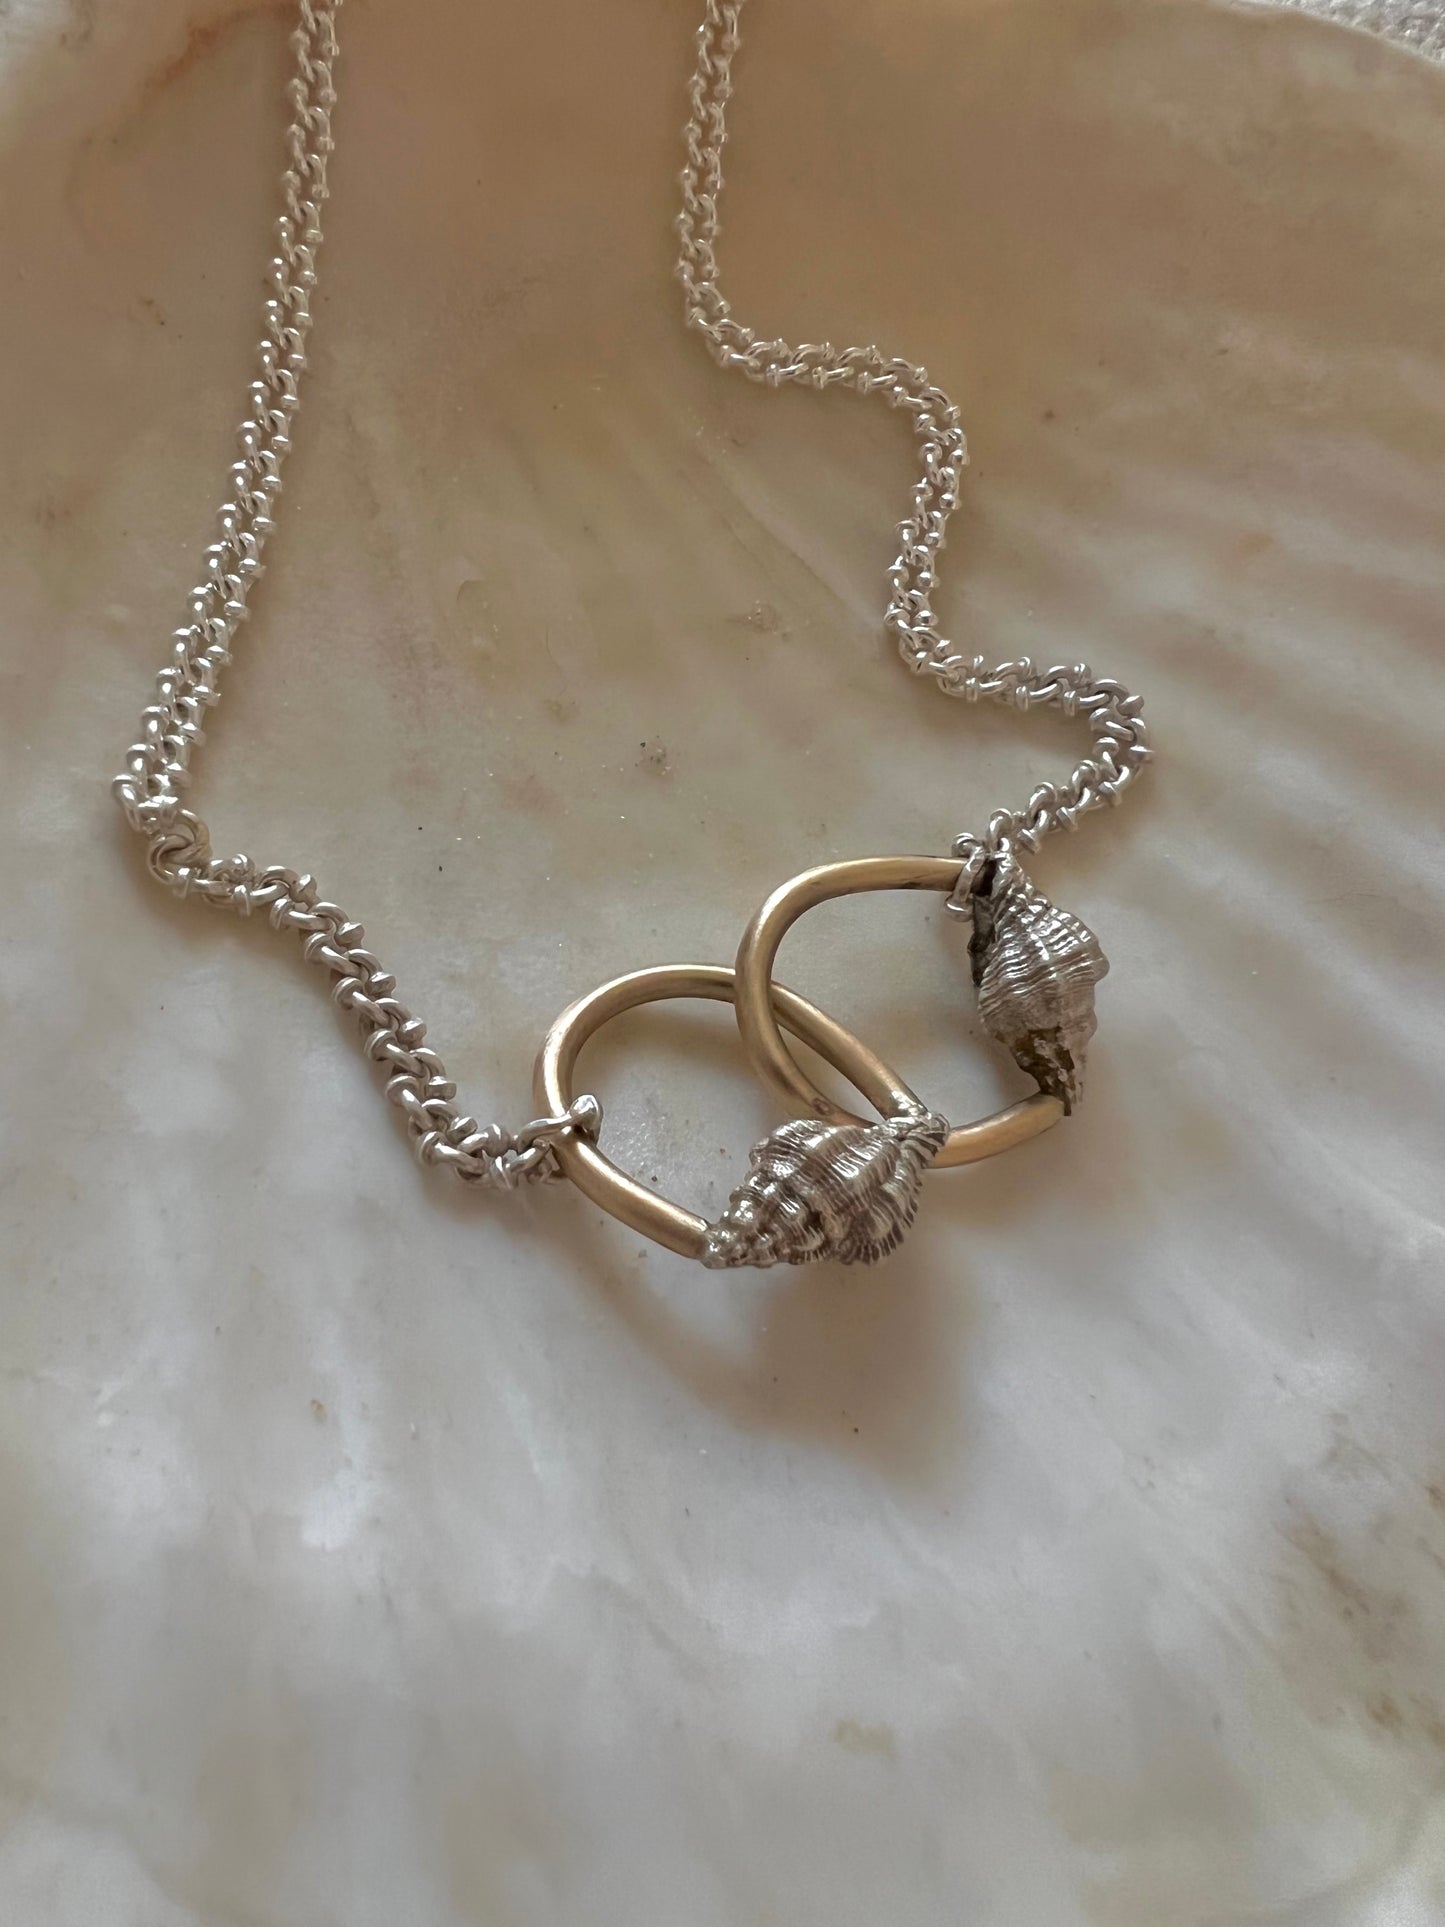 Neptune rings necklace